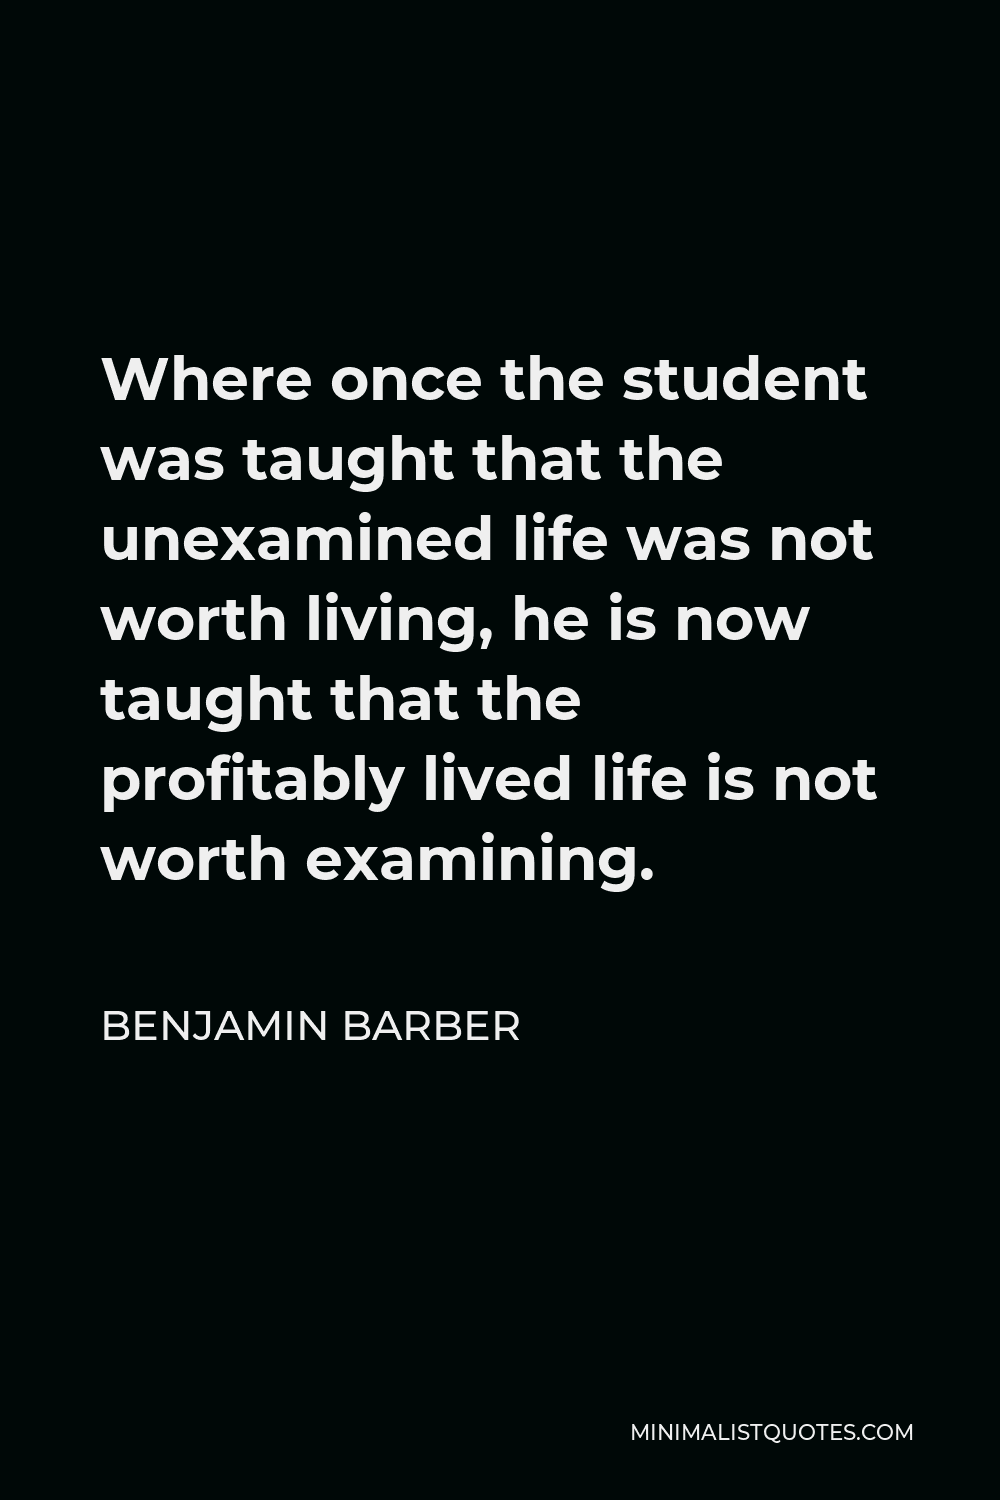 Benjamin Barber Quote - Where once the student was taught that the unexamined life was not worth living, he is now taught that the profitably lived life is not worth examining.